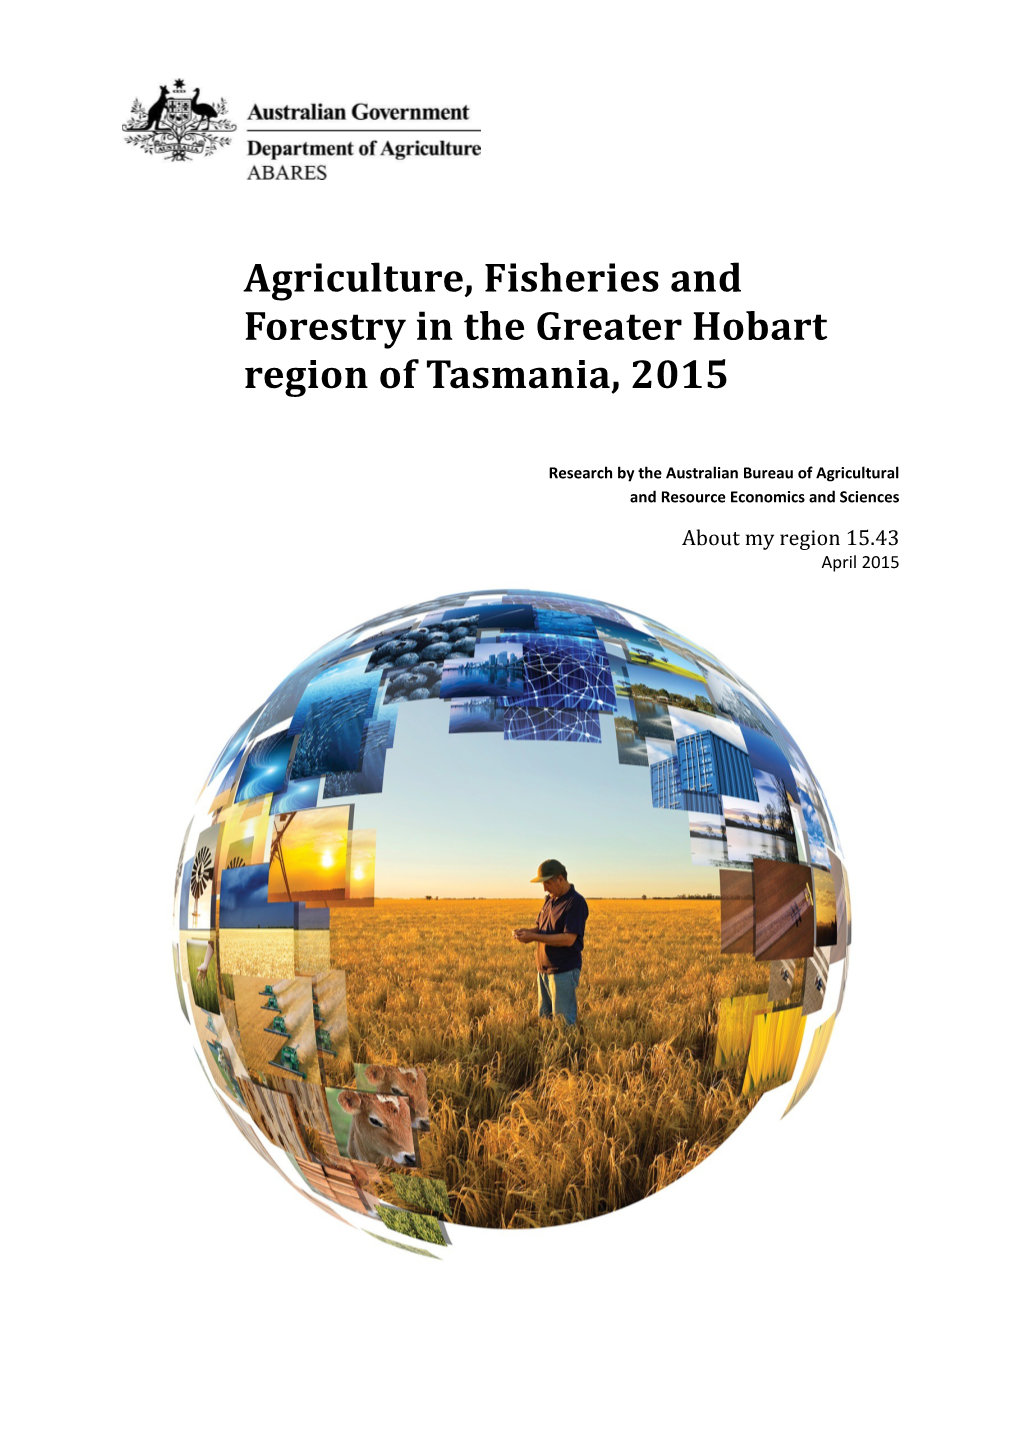 Agriculture, Fisheries and Forestry in the Greater Hobart Region of Tasmania, 2015